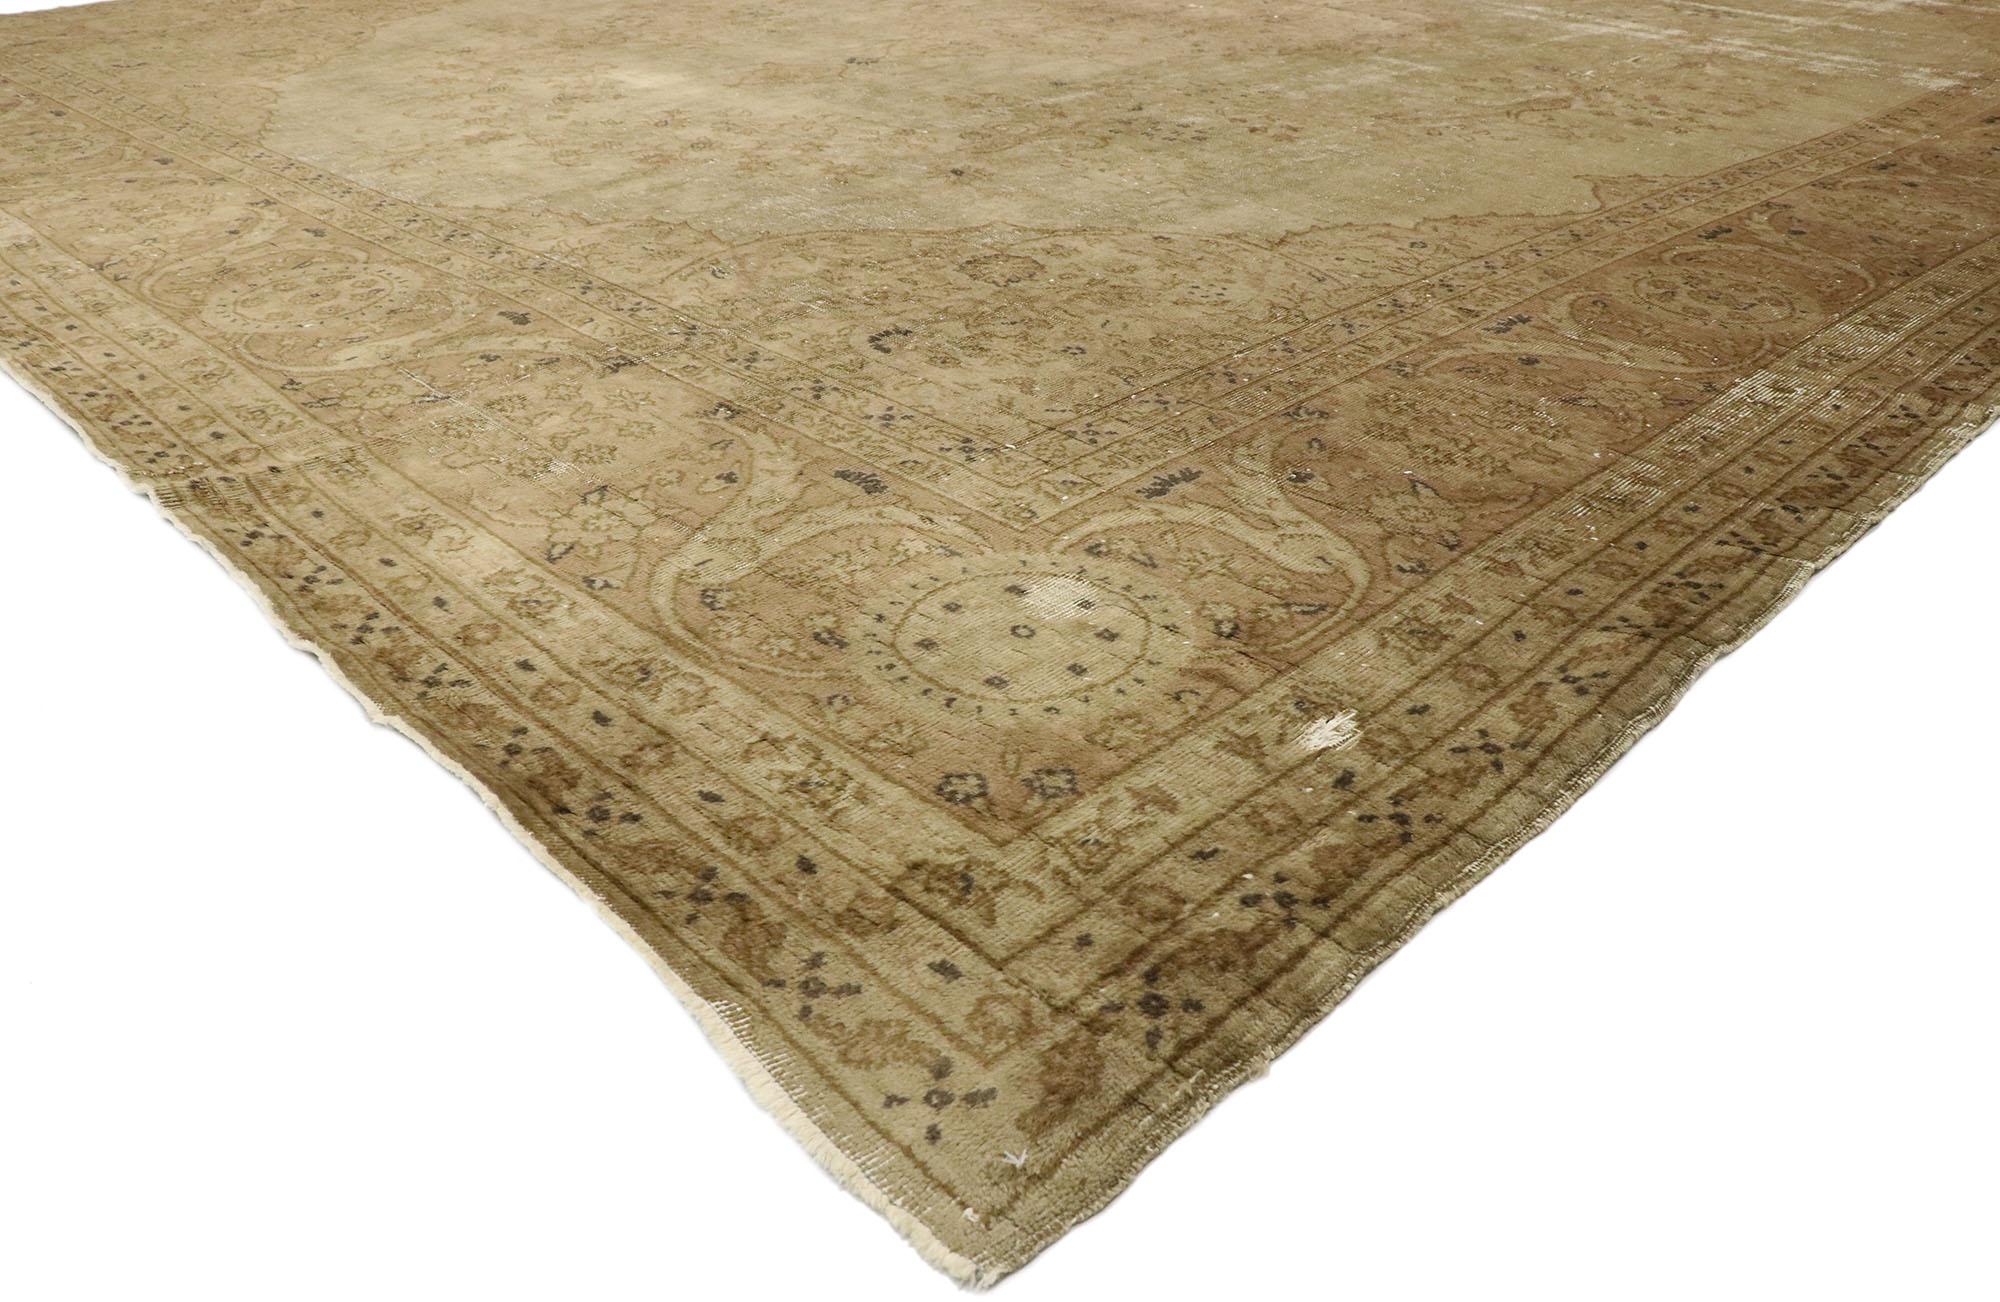 77508 Distressed Antique Turkish Sivas Rug, 12'11 x 16'04. Antique Turkish Sivas rugs that have been distressed and given an antique-wash are traditional rugs originating from Sivas in central Anatolia, Turkey. These authentic Sivas rugs undergo a